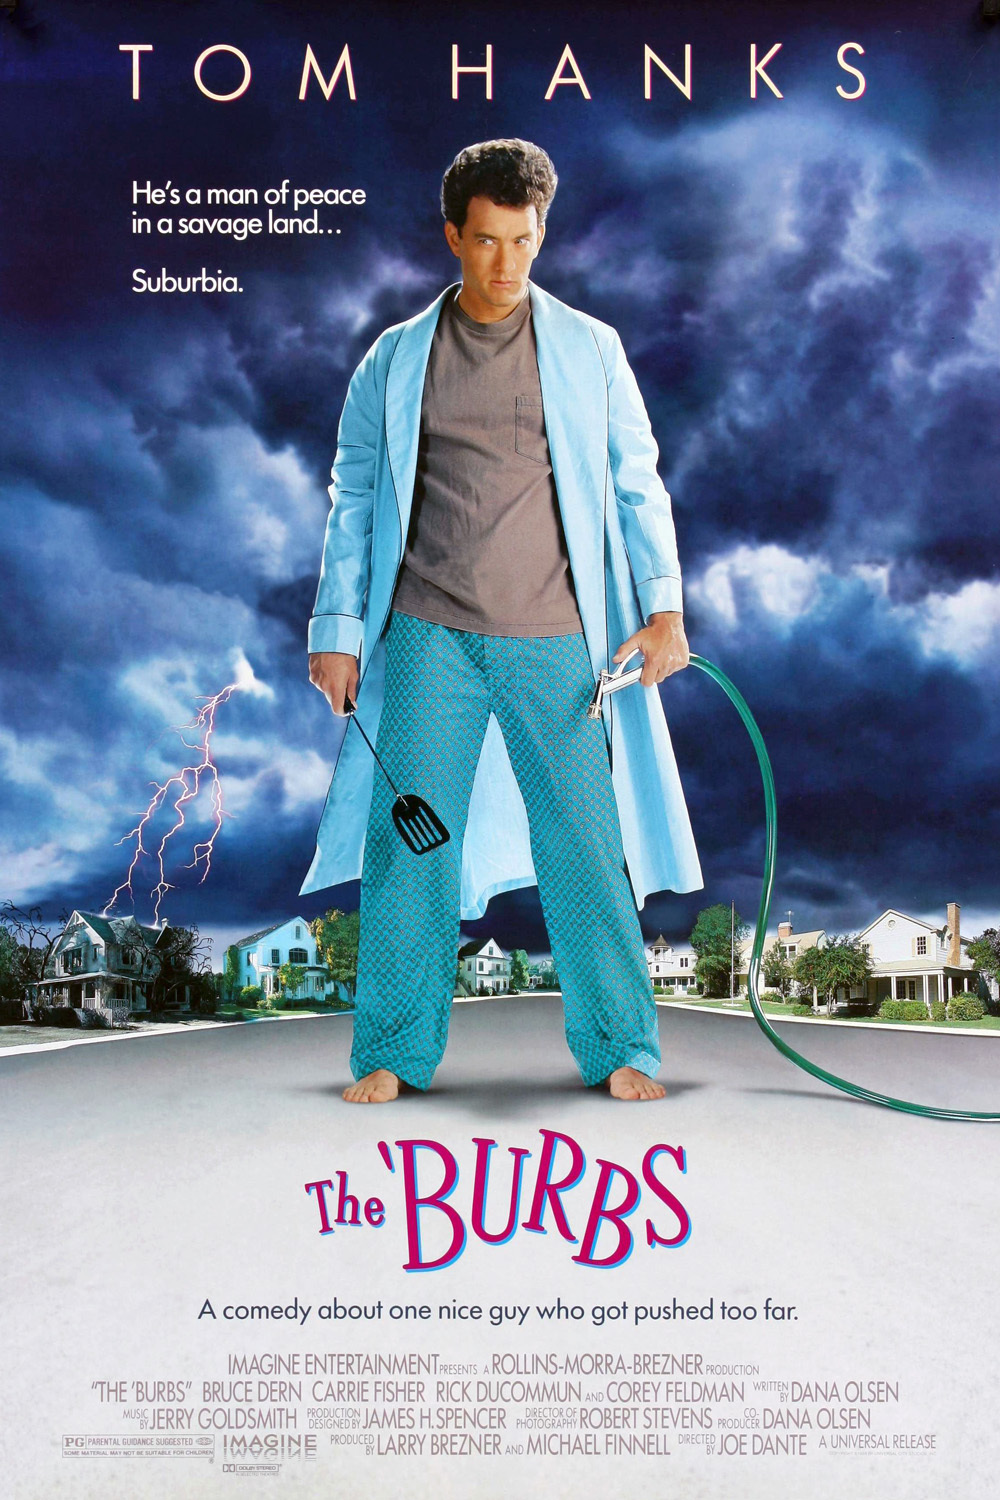 Best Cult Classic Movies Of The 80S: The 'Burbs